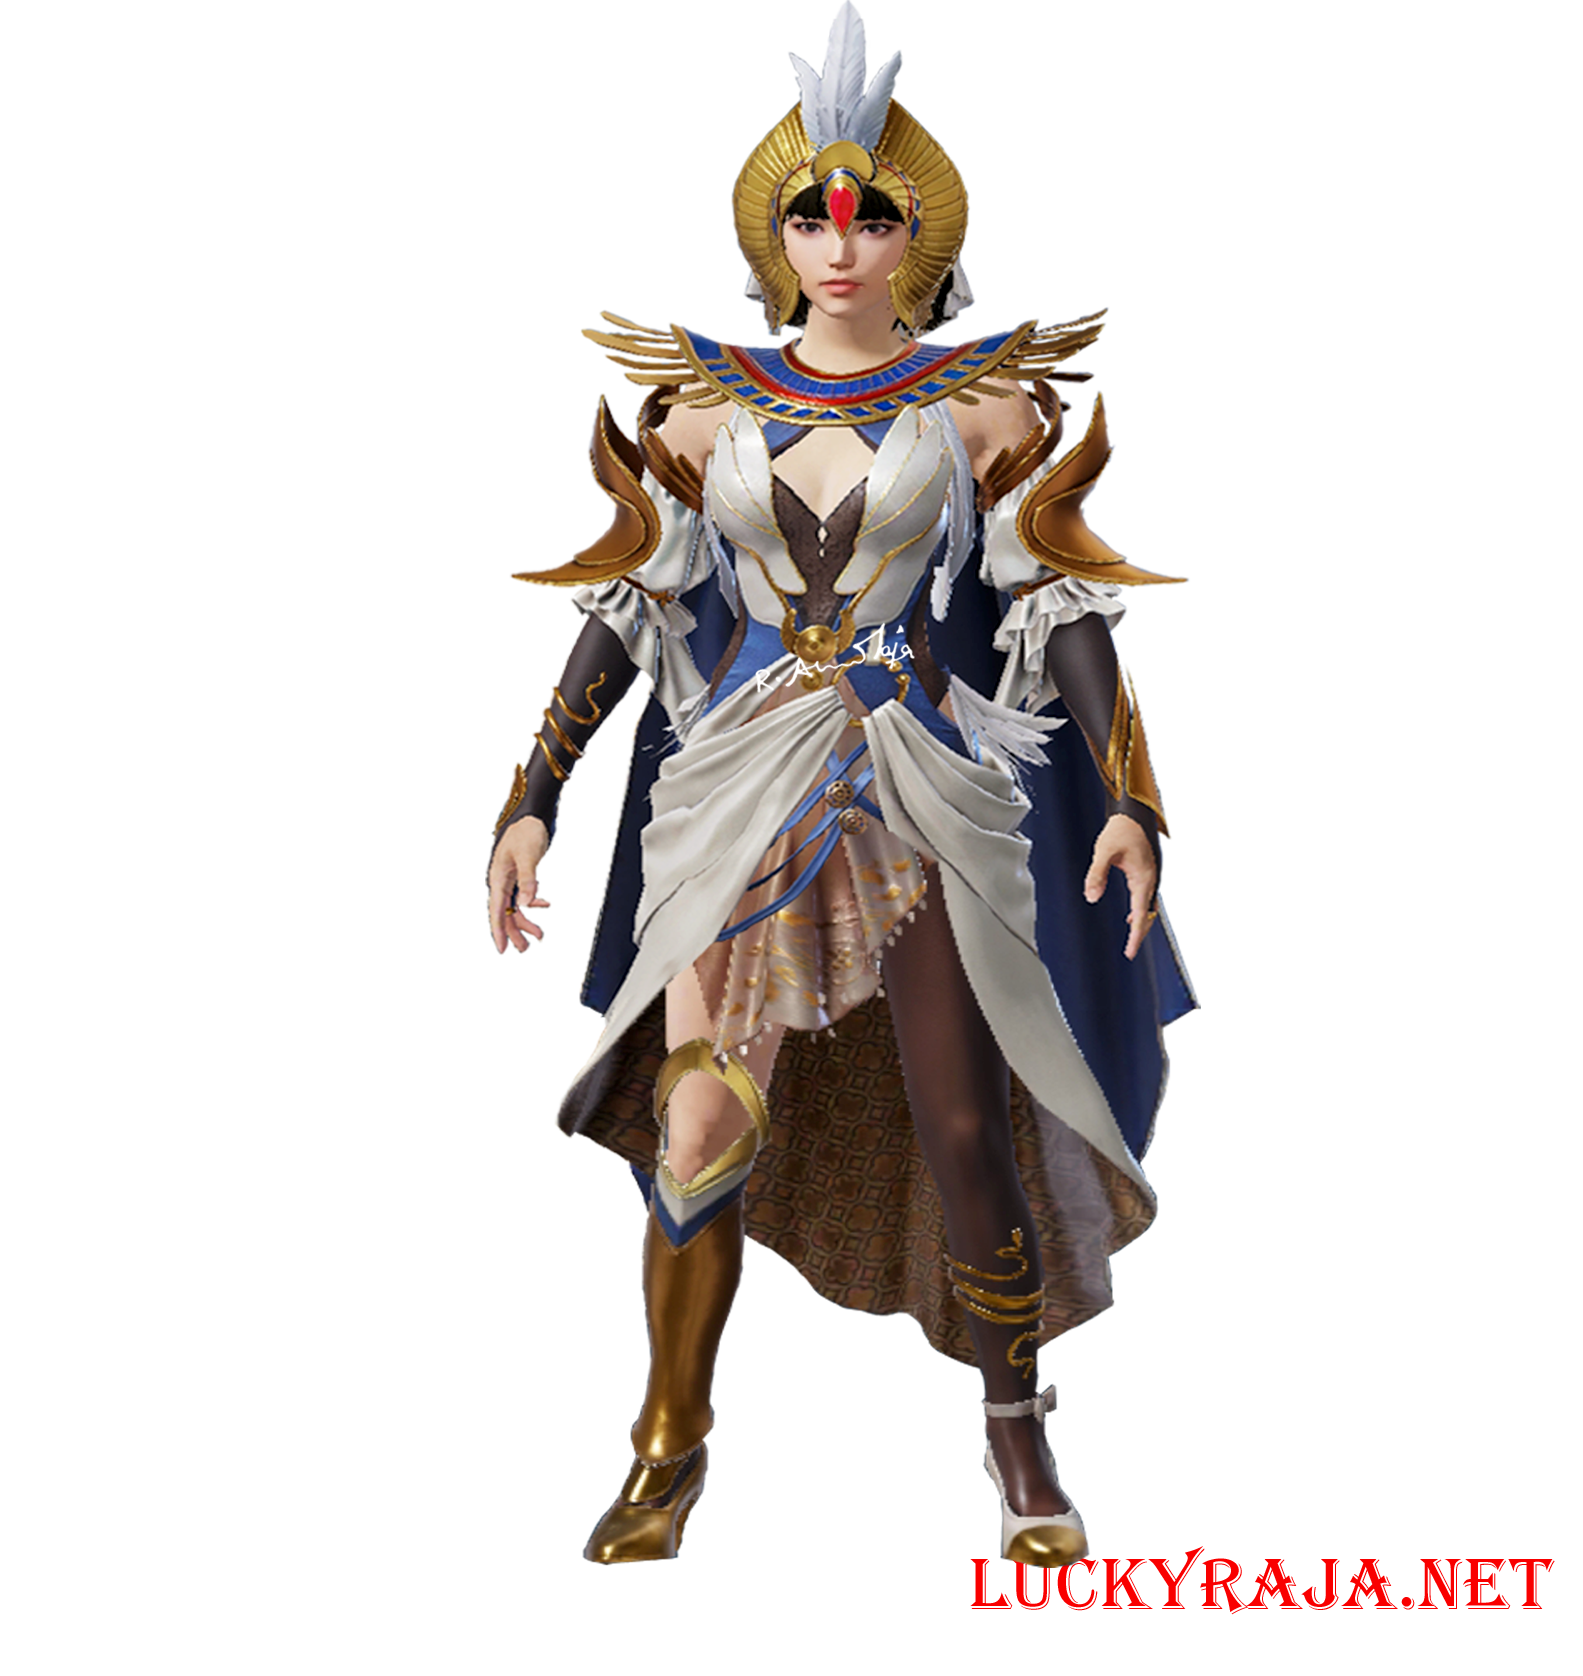 Solar Oracle ,Solar Oracle image,Solar Oracle pubg mobile,Solar Oracle outfit,Solar Oracle images, outfits,animation,cartoon images